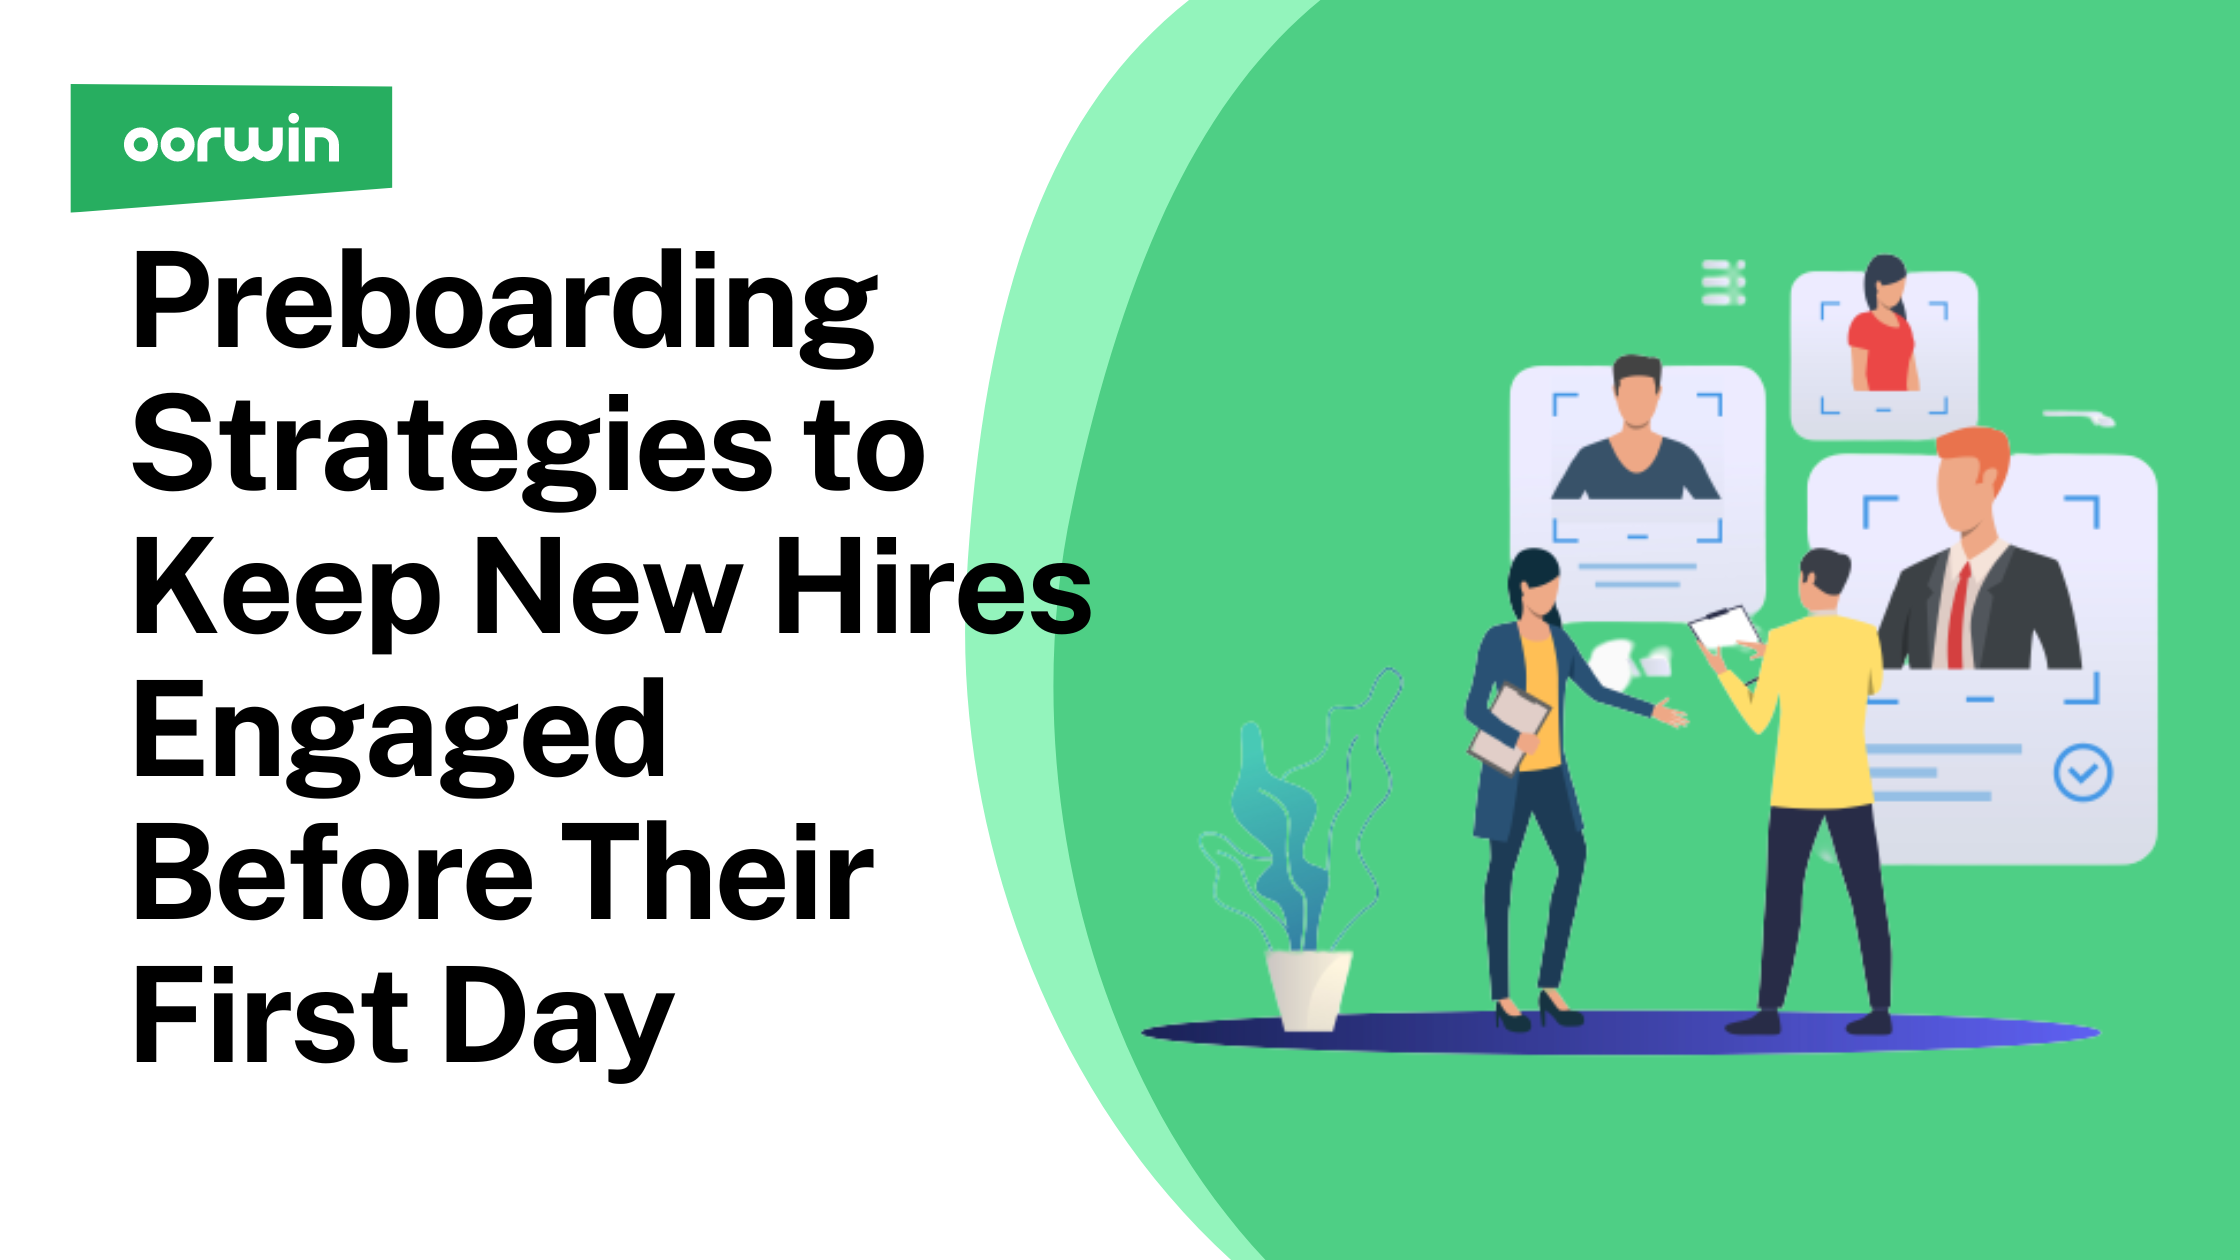 6 Preboarding Strategies to Keep New Hires Engaged